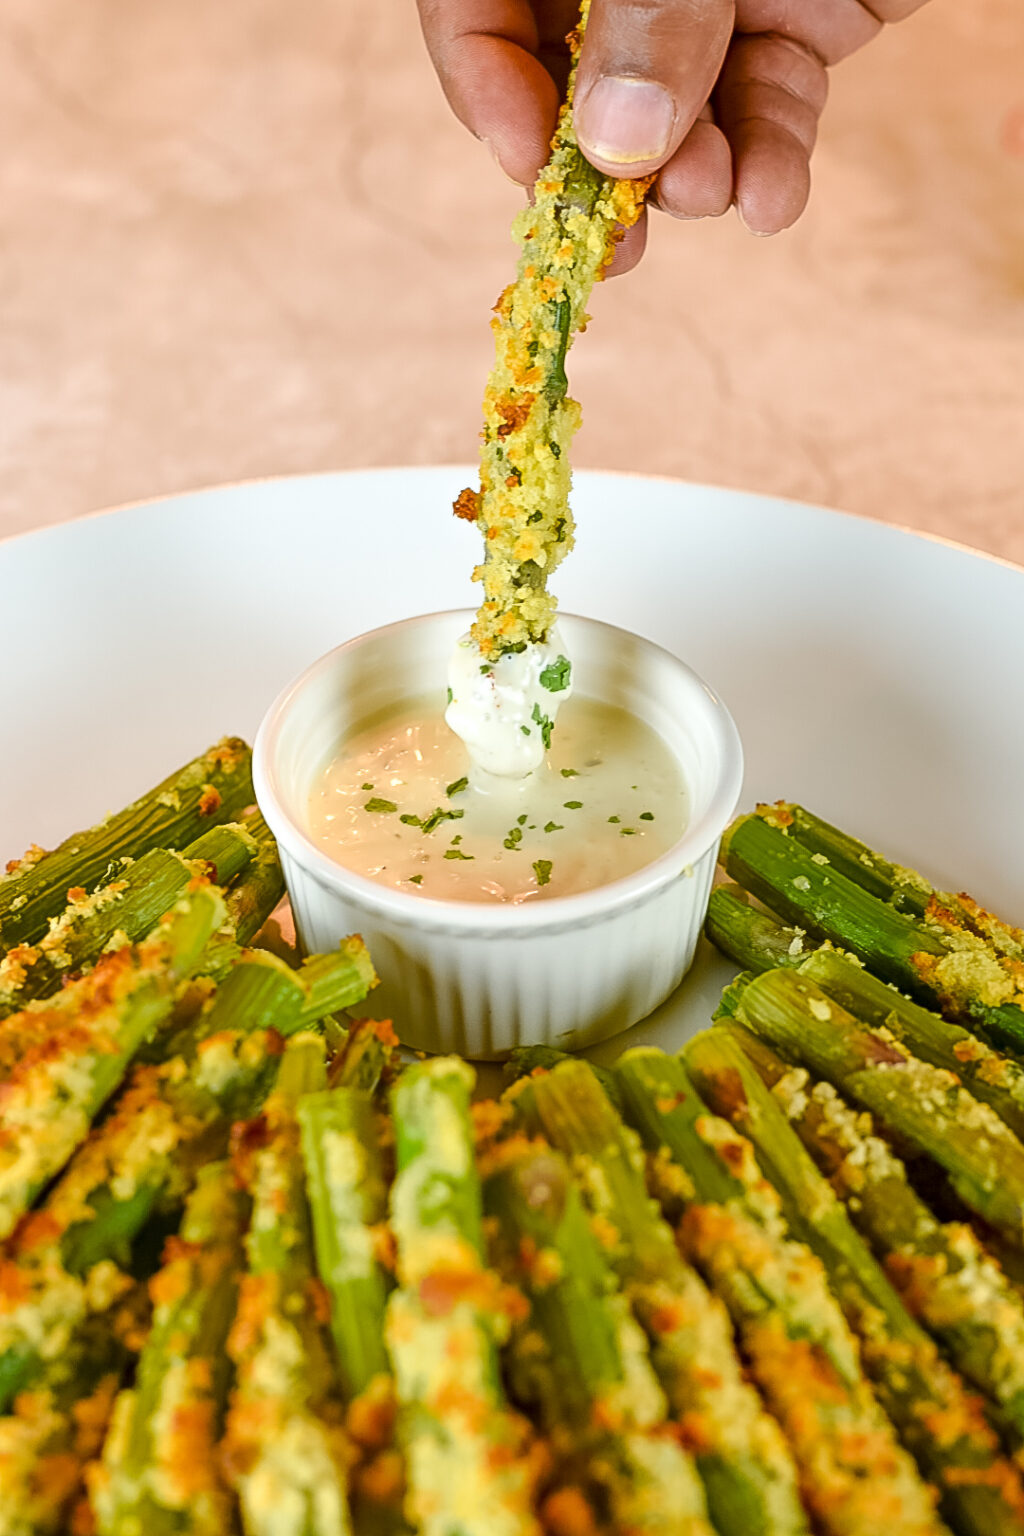 Dipping Parmesan Crusted Asparagus Spears in ranch dressing.